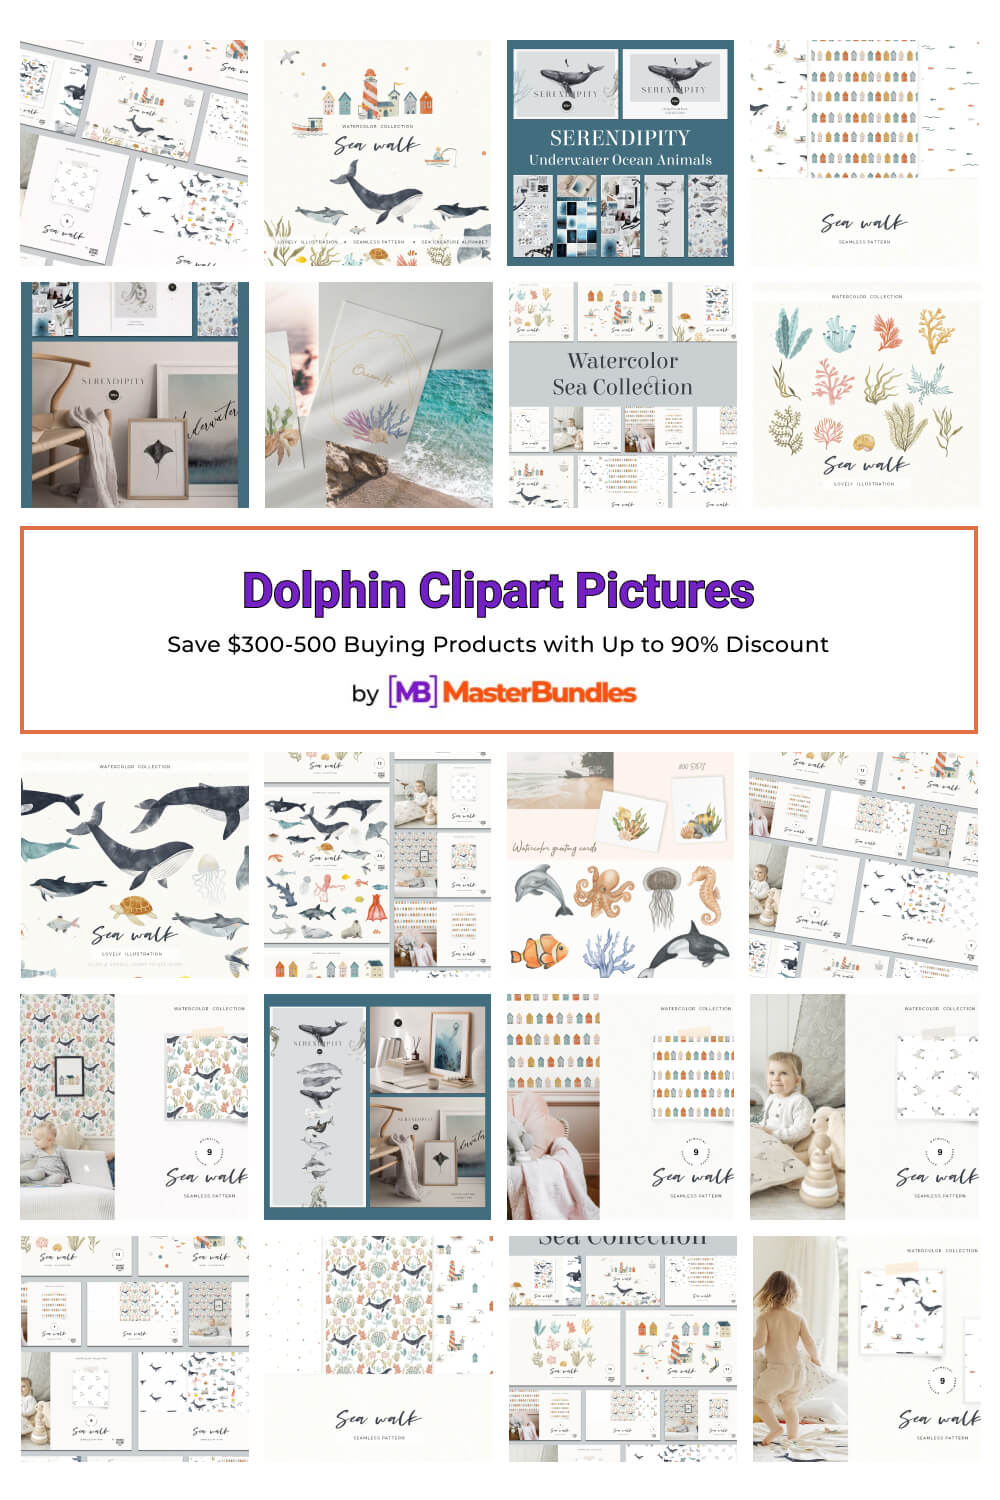 dolphin clipart pictures pinterest image.